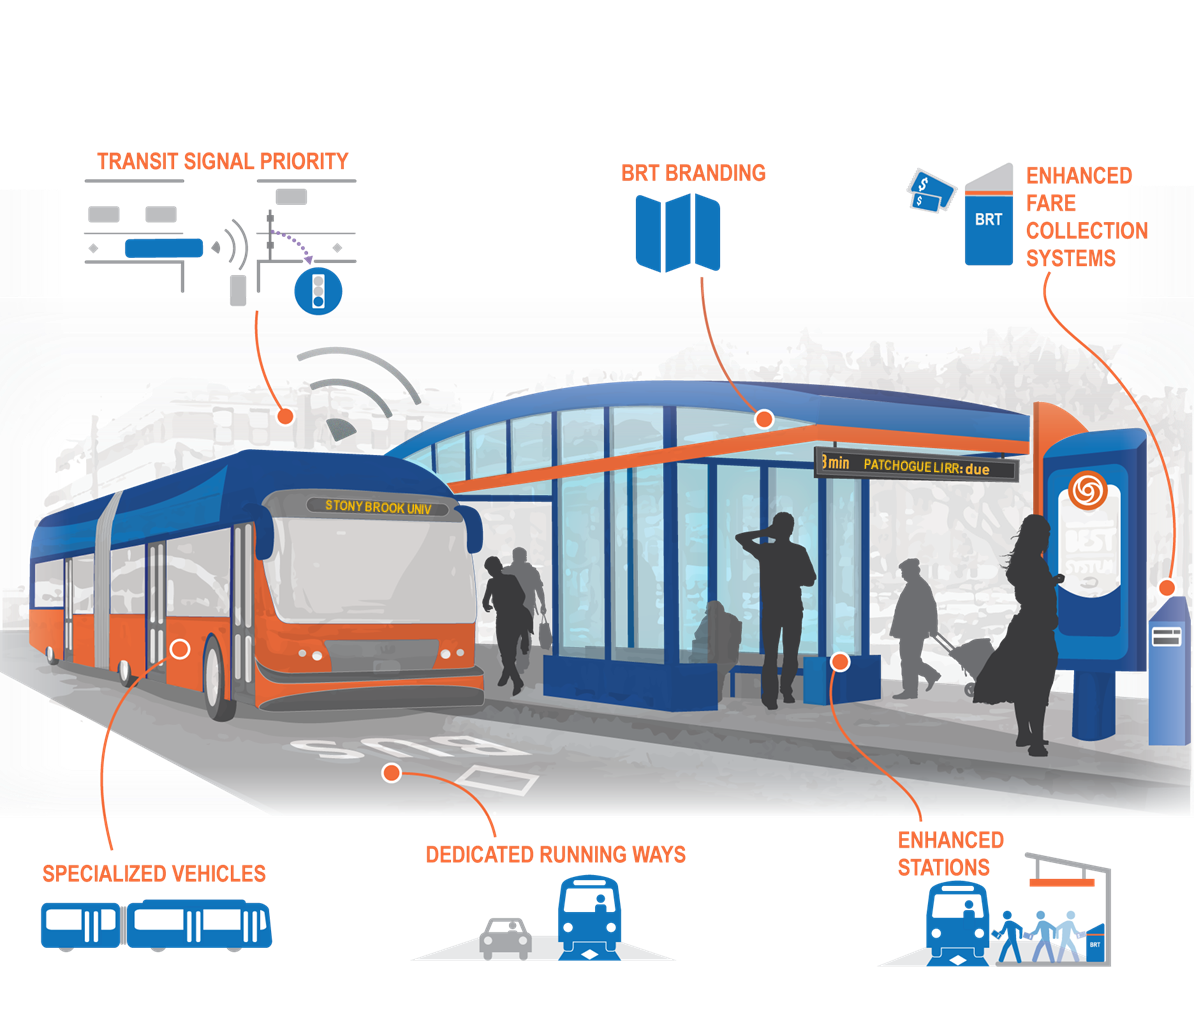 What BRT Means and When to Use It